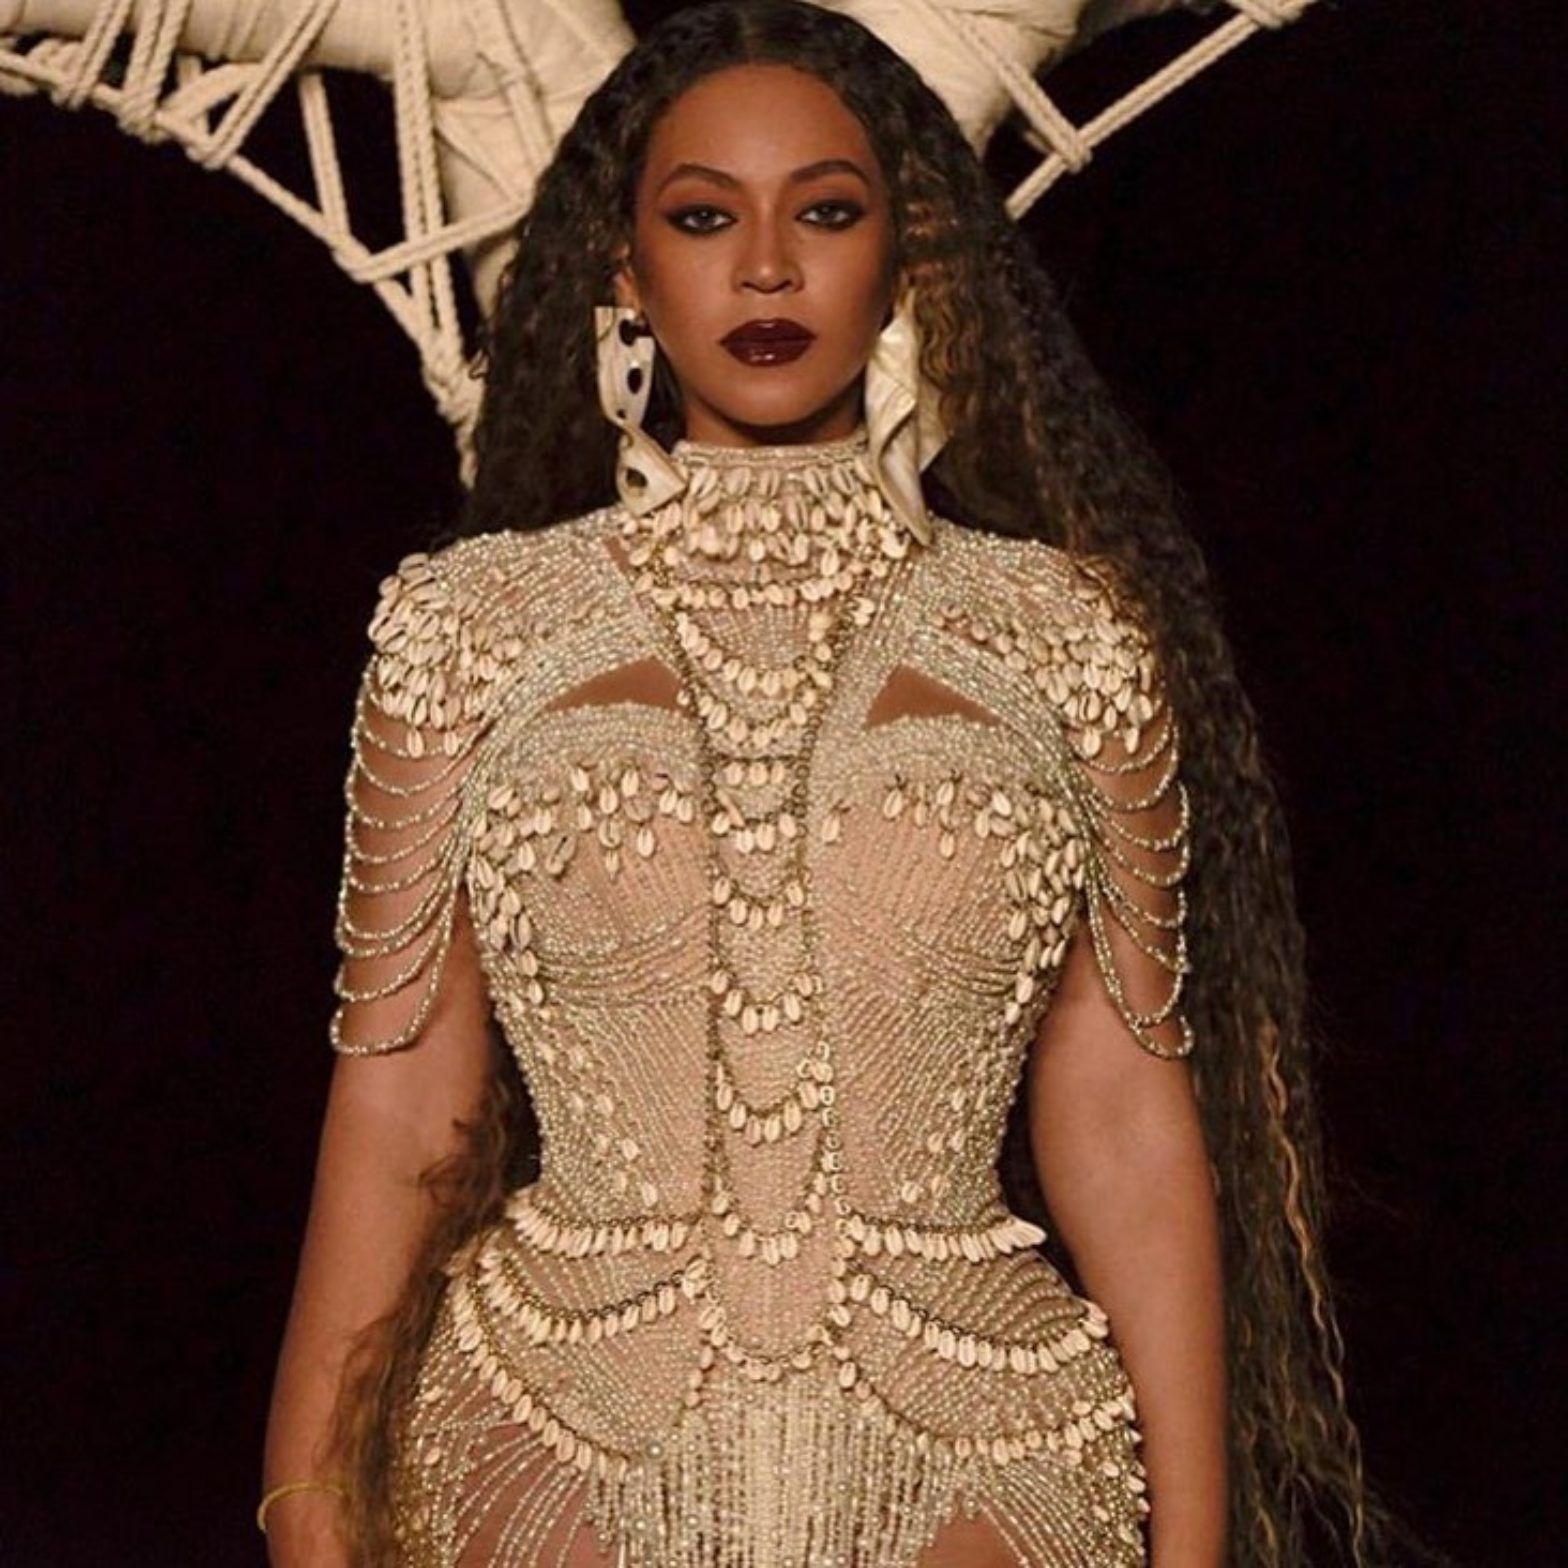 beyonce-knowles-in-alexandrine-for-spirit-music-video